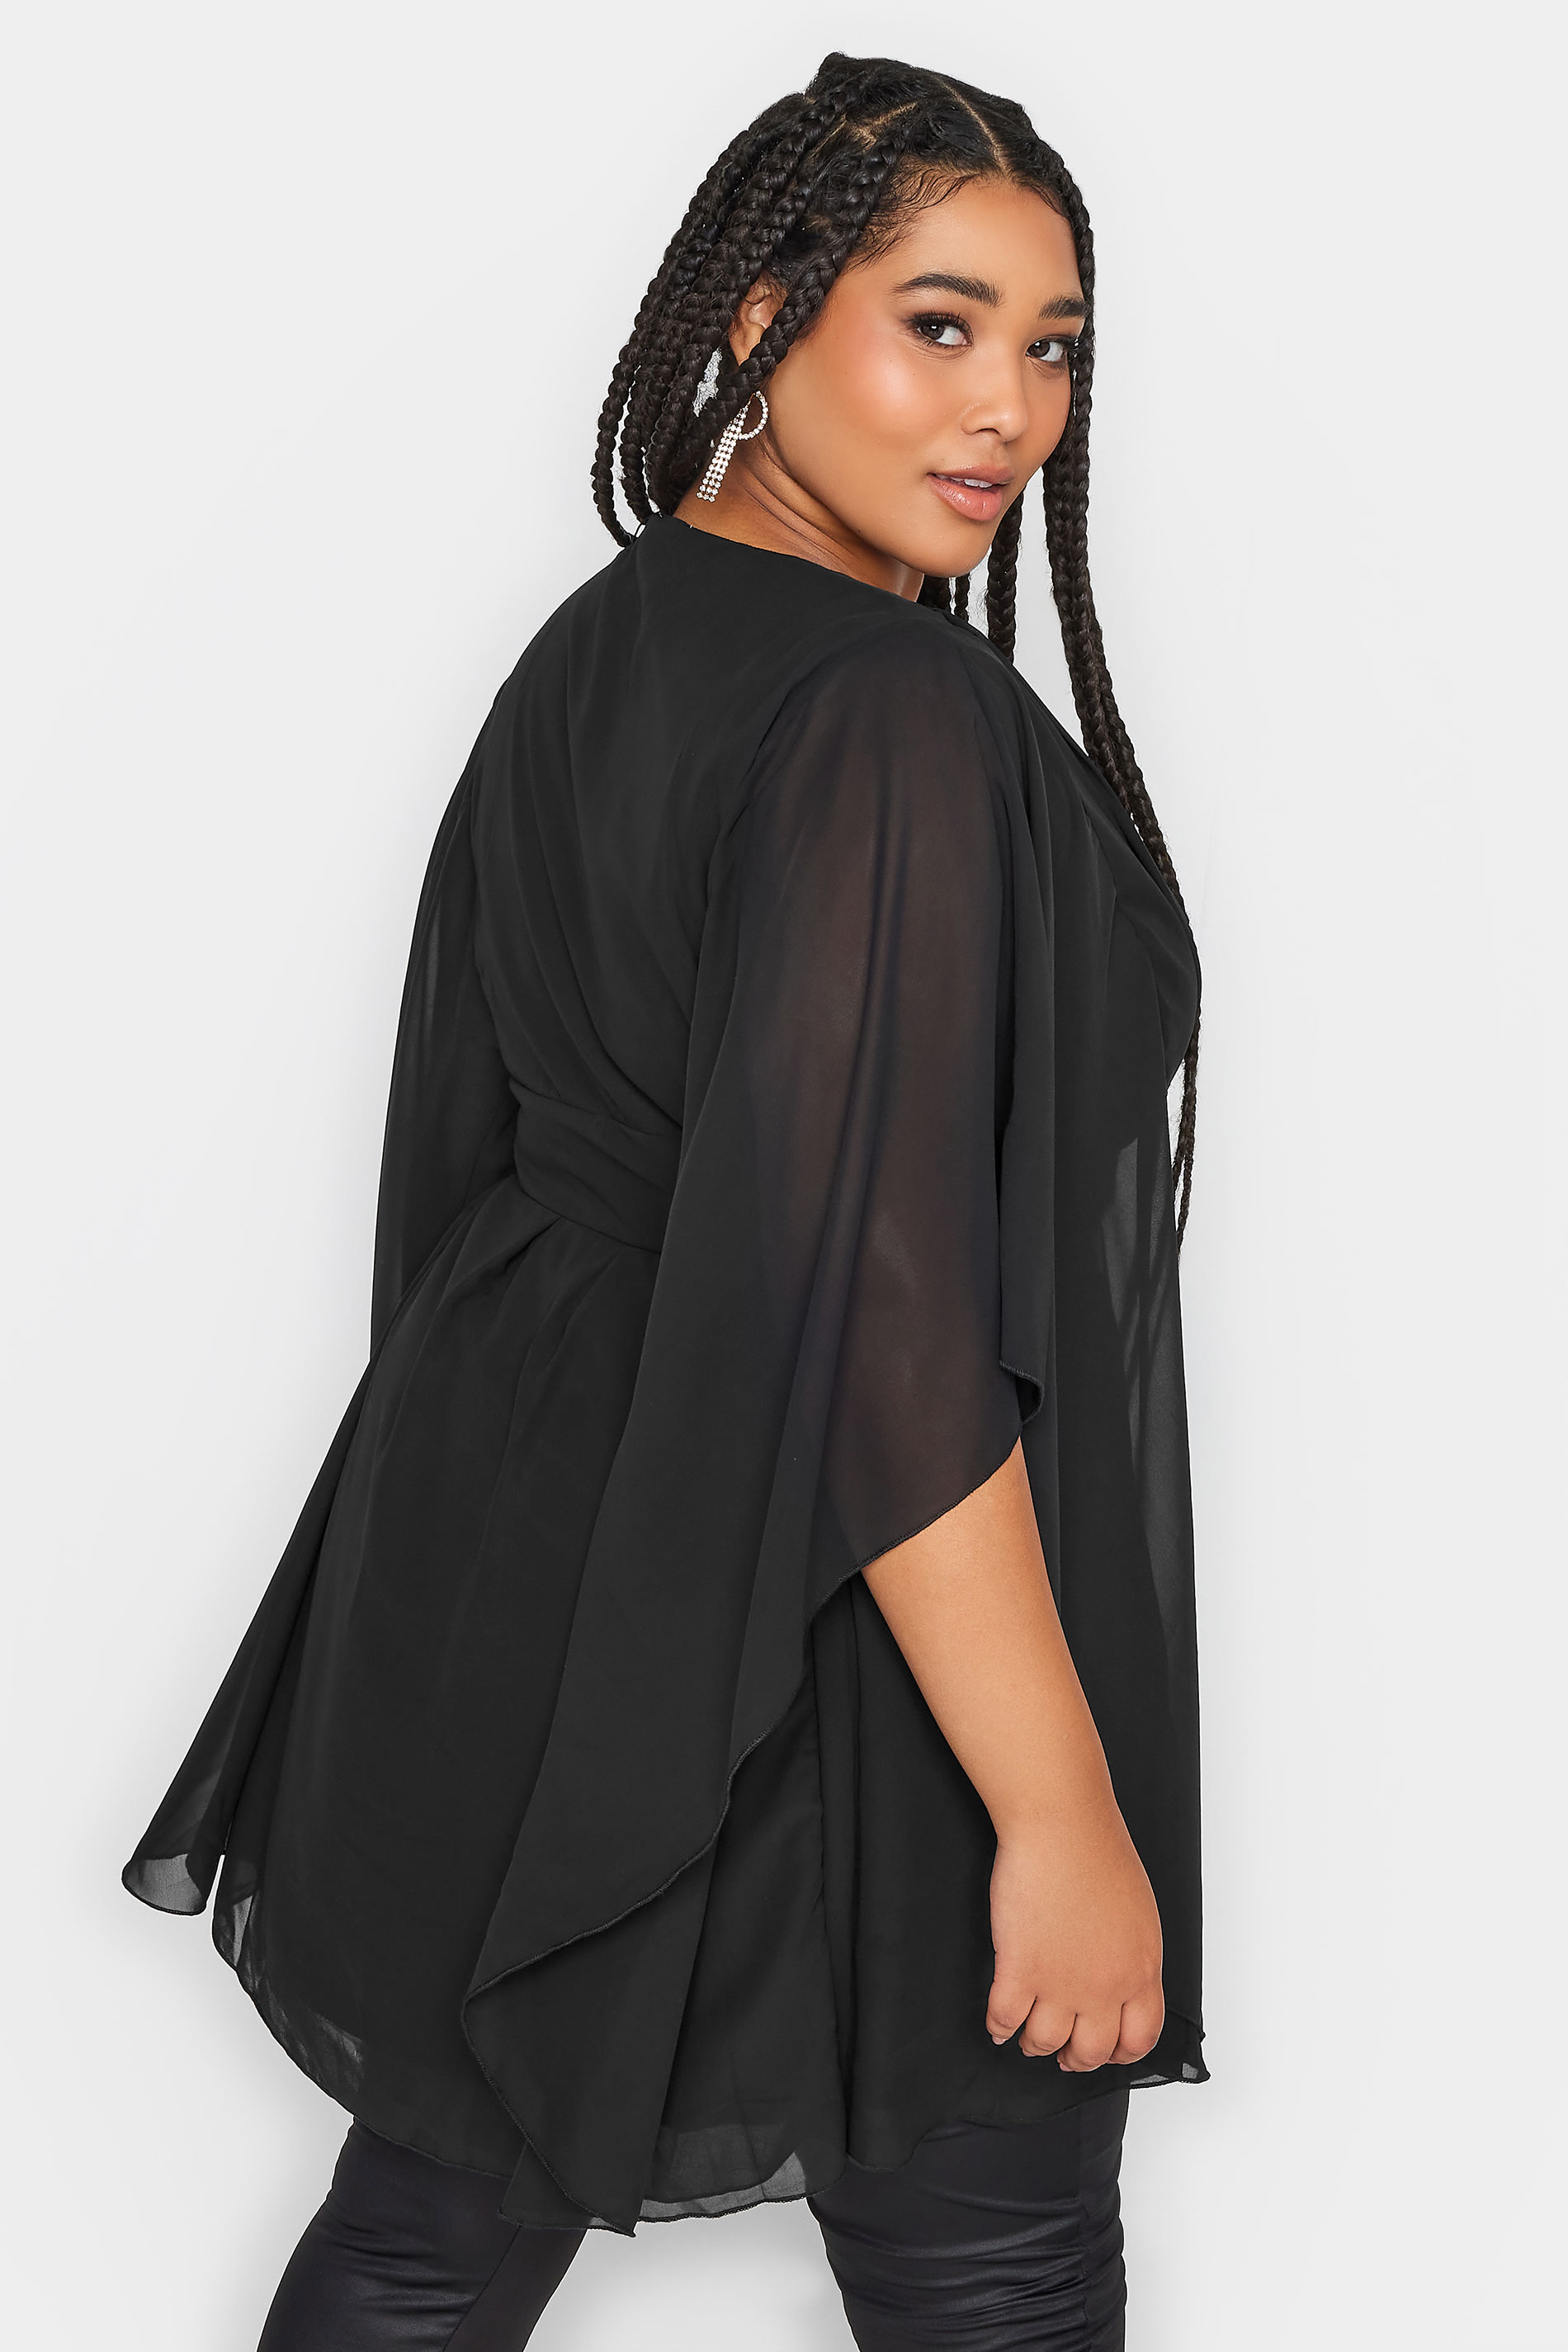 LUXE Plus Size Black Hand Embellished Waist Cape Top | Yours Clothing 3